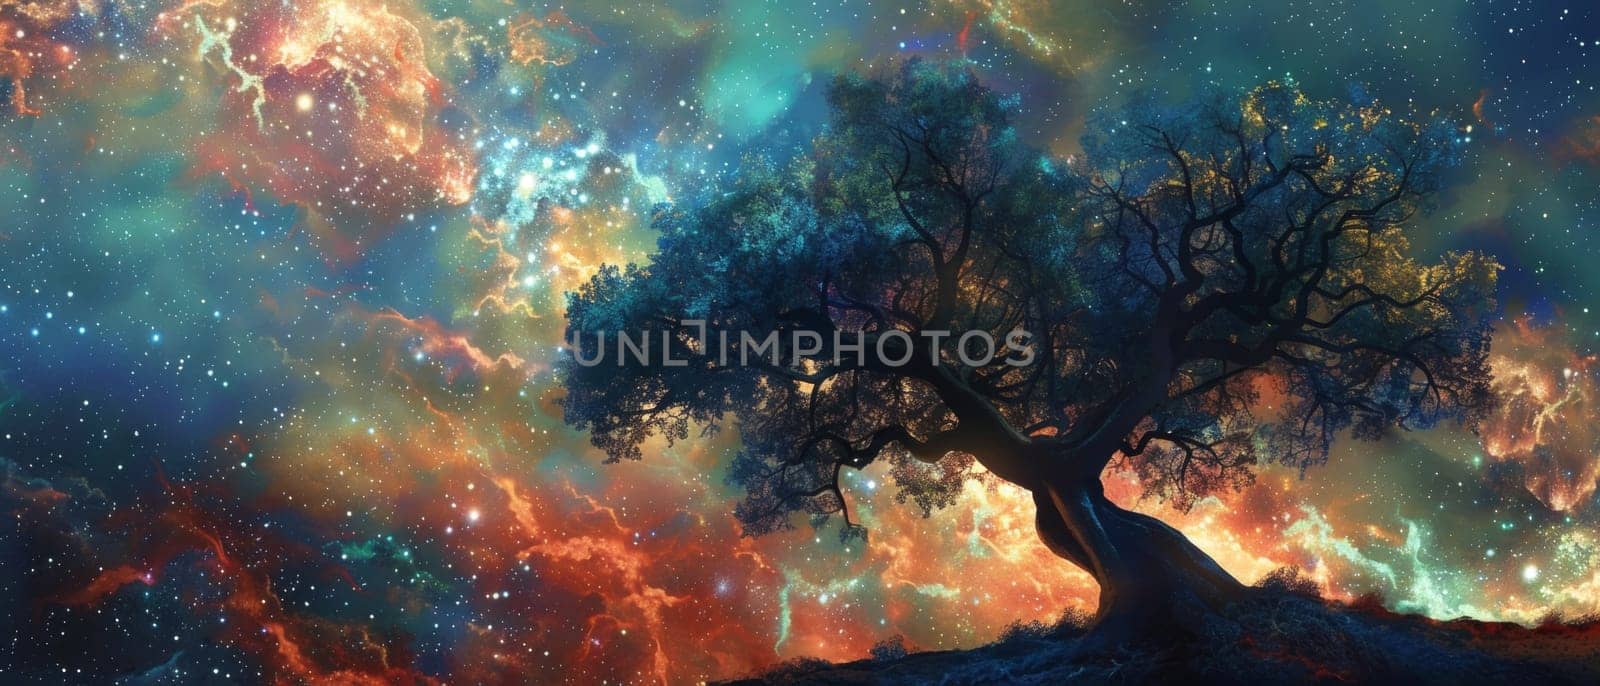 An awe-inspiring celestial nightscape showcases a majestic tree amidst a riot of interstellar colors and cosmic light. by sfinks